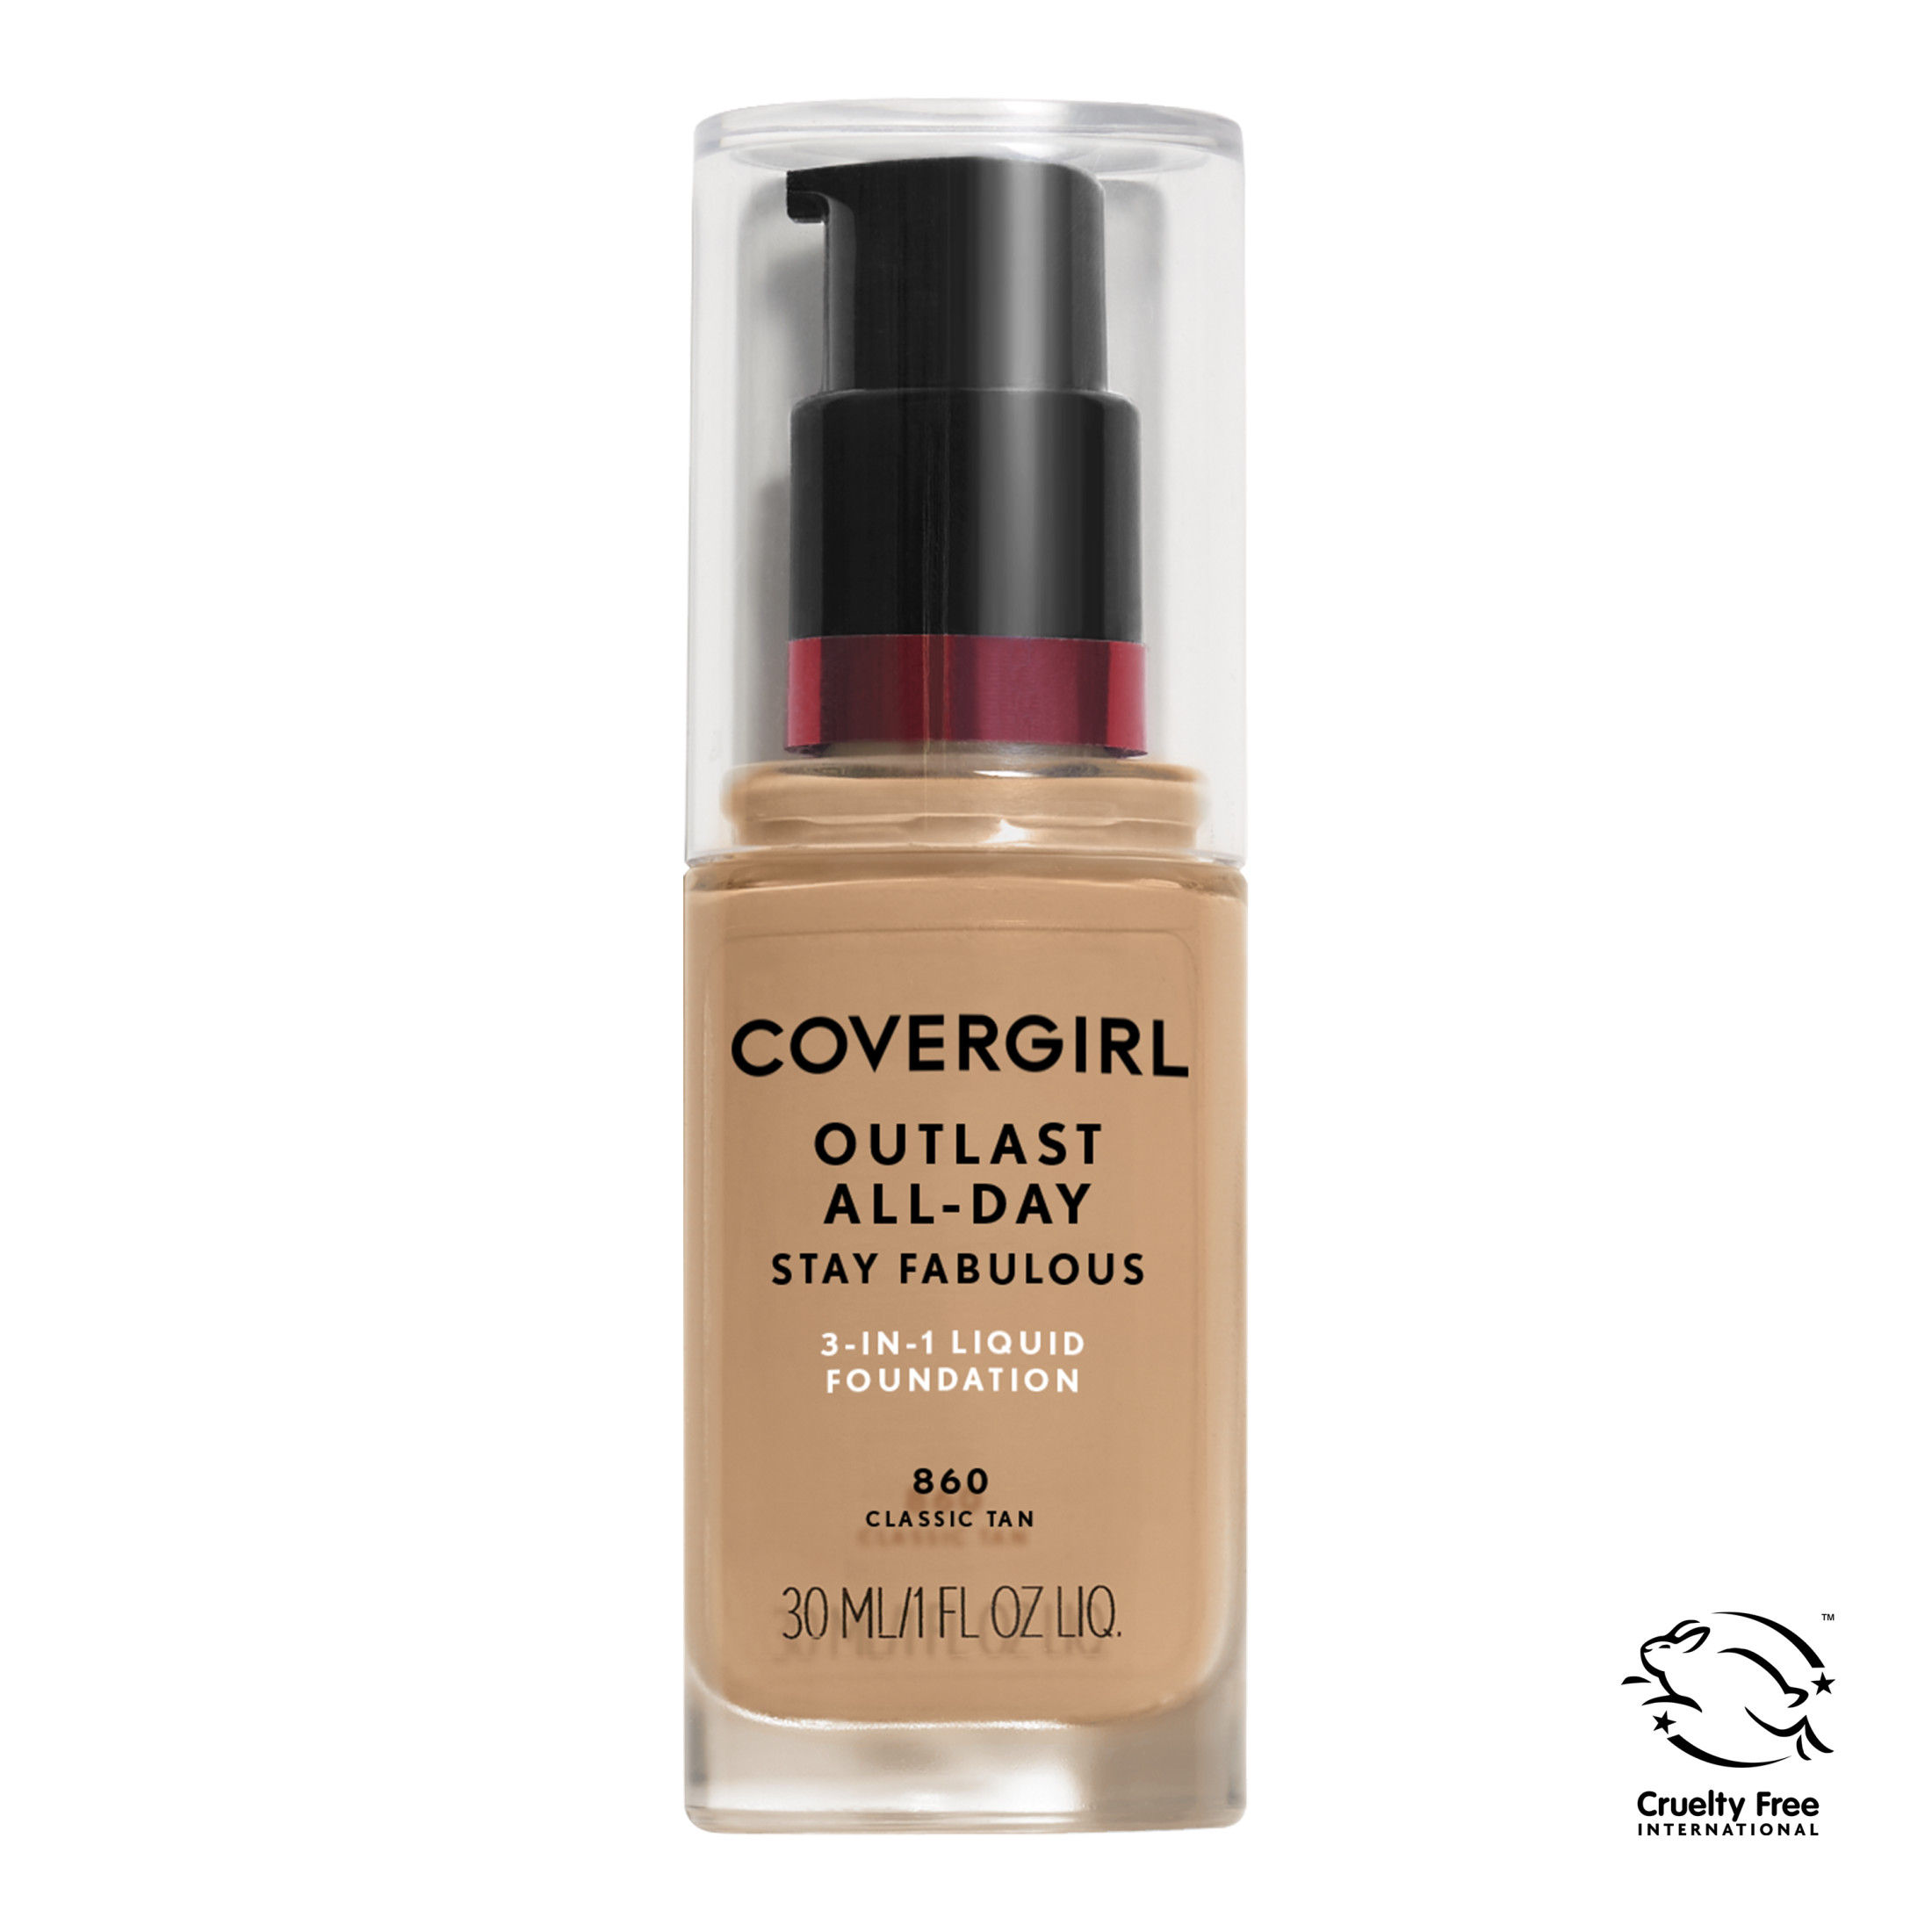 COVERGIRL Outlast All-Day Stay Fabulous 3-in-1 Foundation, 845 Warm Beige, 1 oz - image 1 of 6